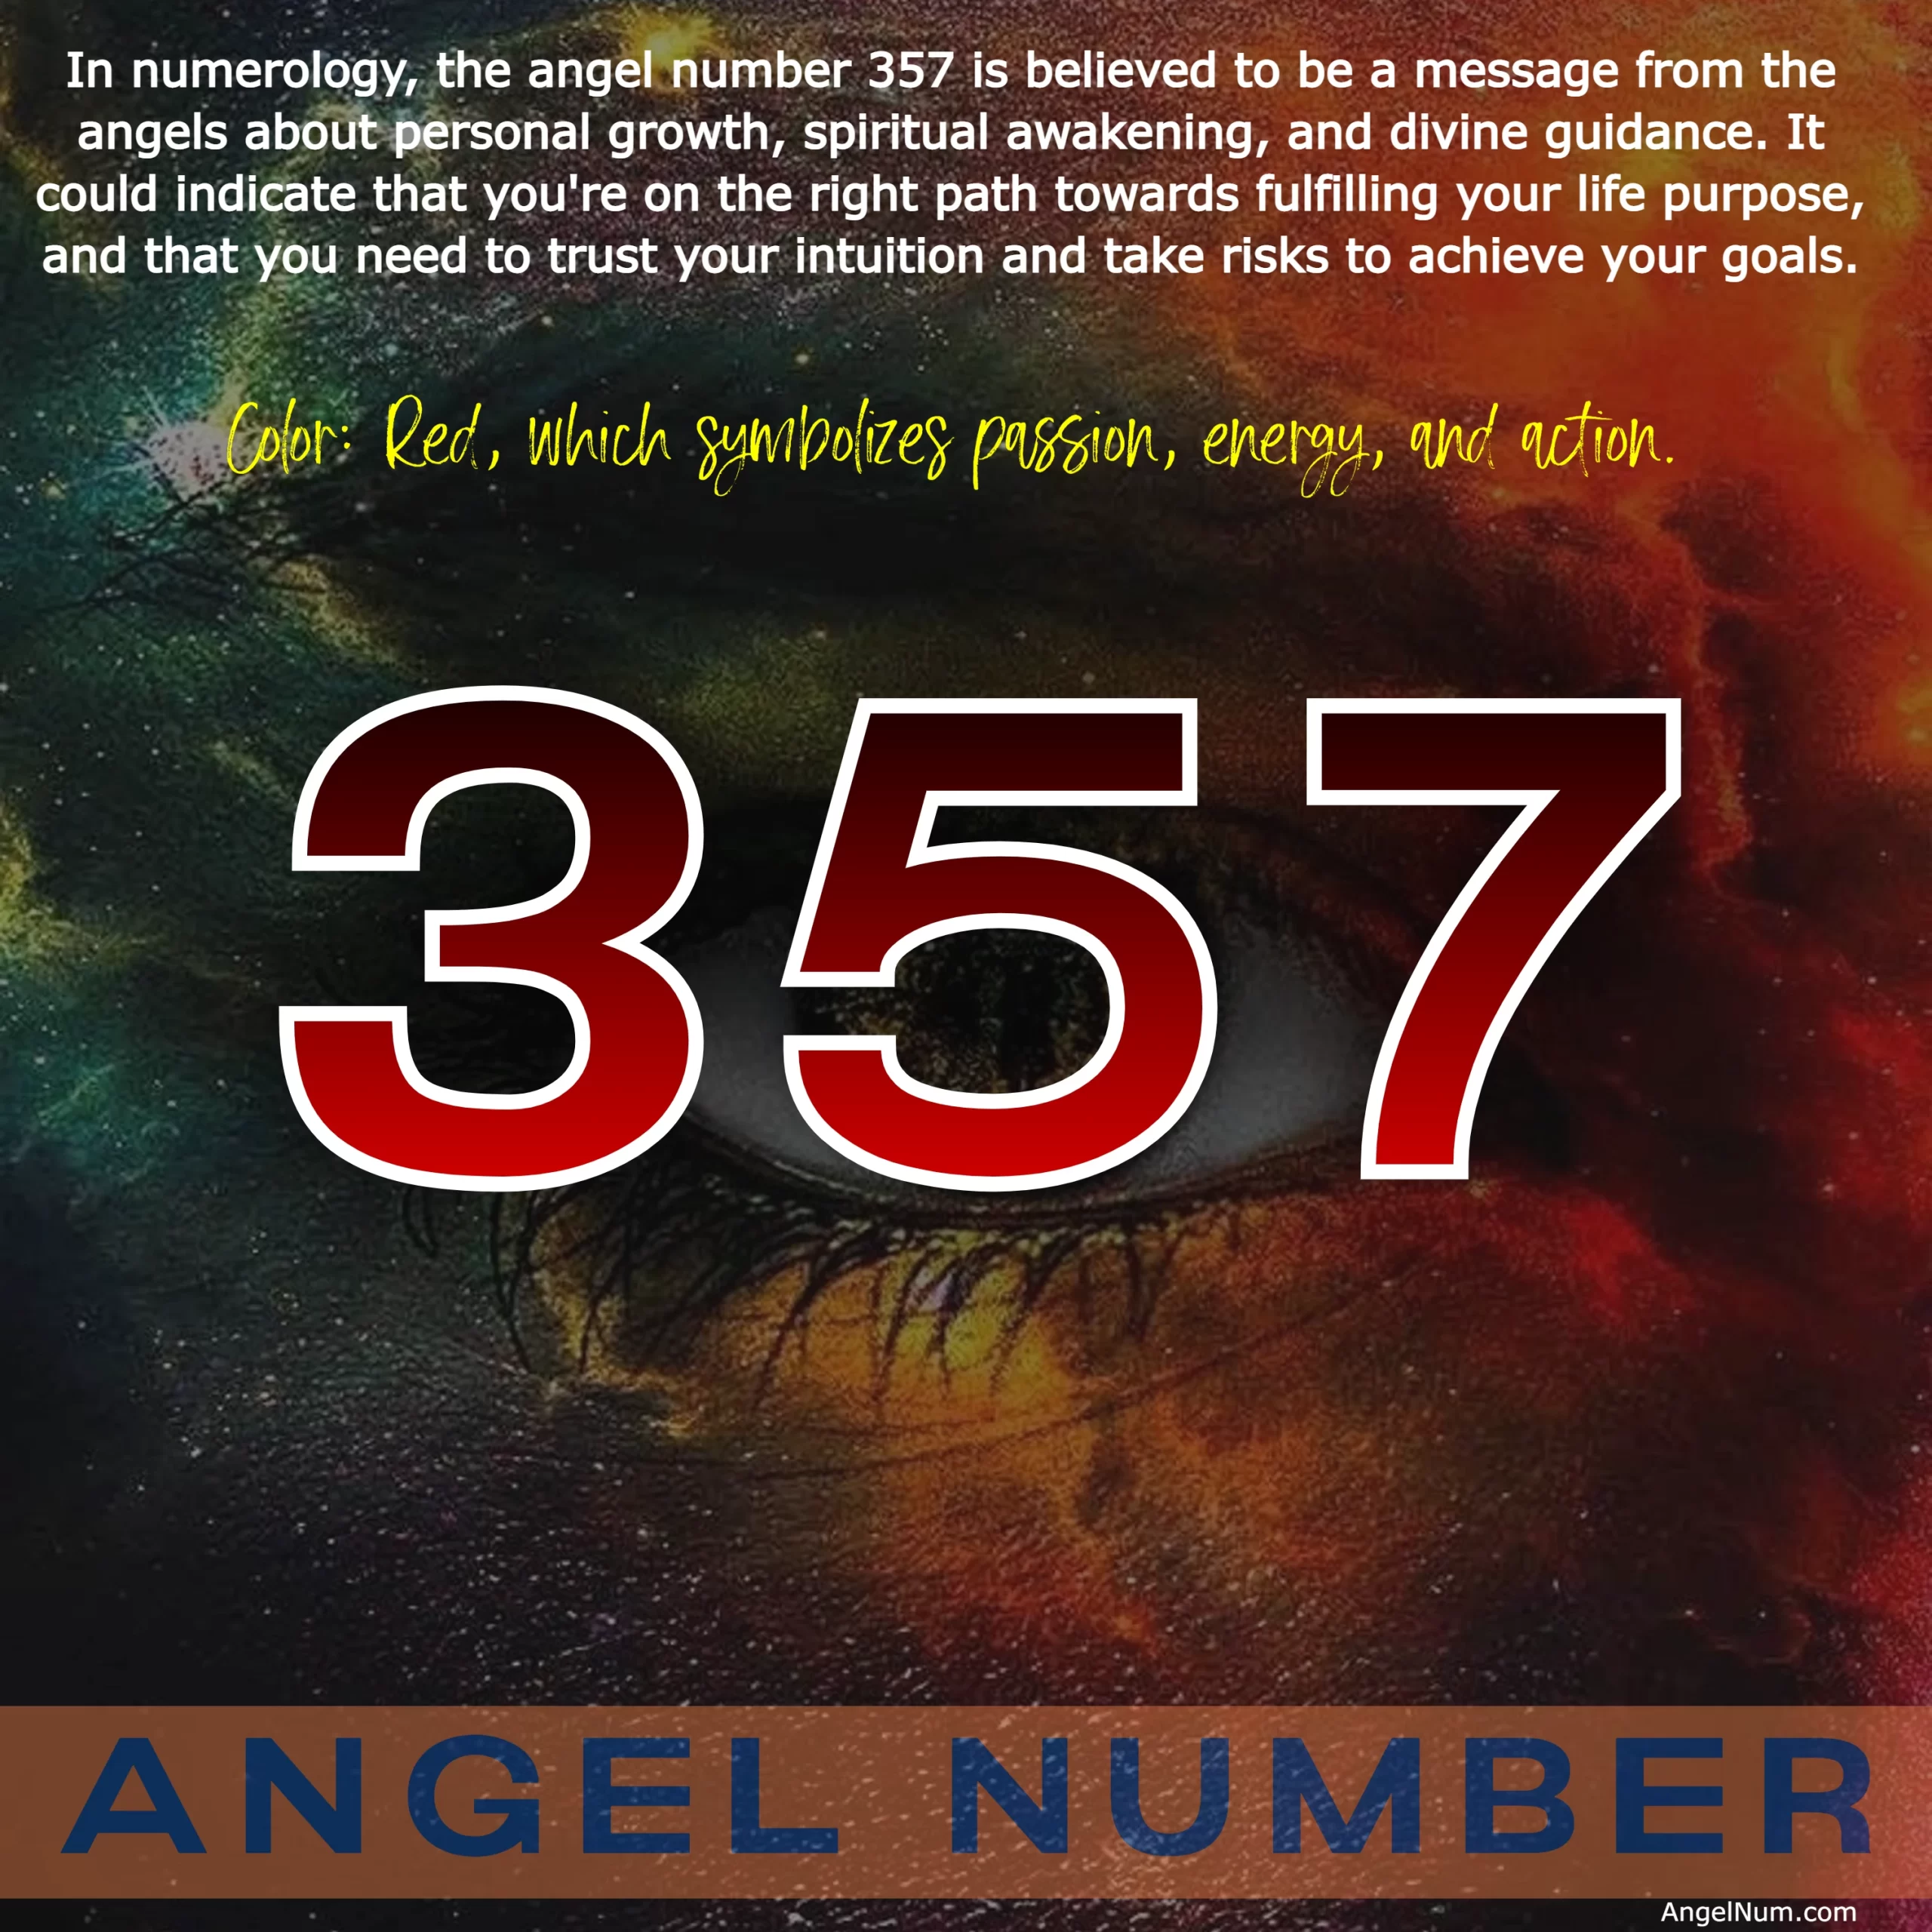 Angel Number 357: Trust Your Intuition and Take Action